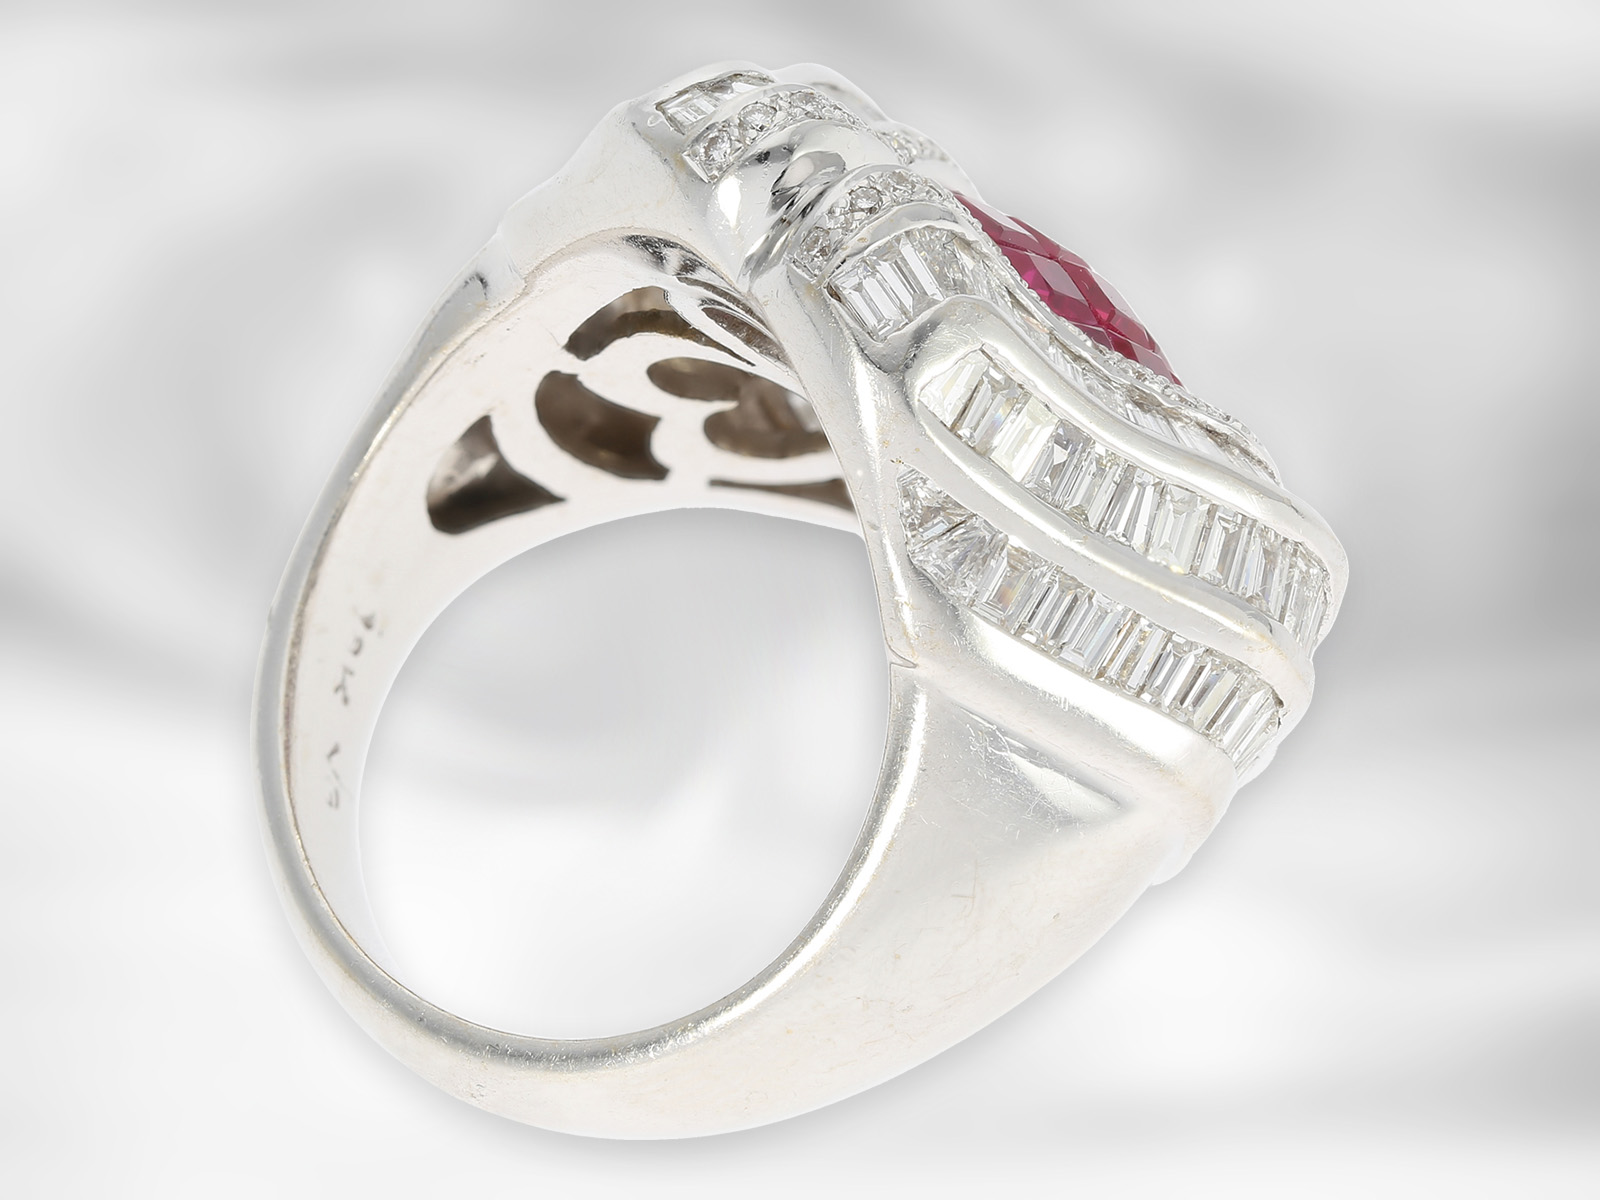 Ring: extravagant luxurious diamond/ruby ring, total approx. 5.49ct, 18K white gold, sophisticated g - Image 4 of 8